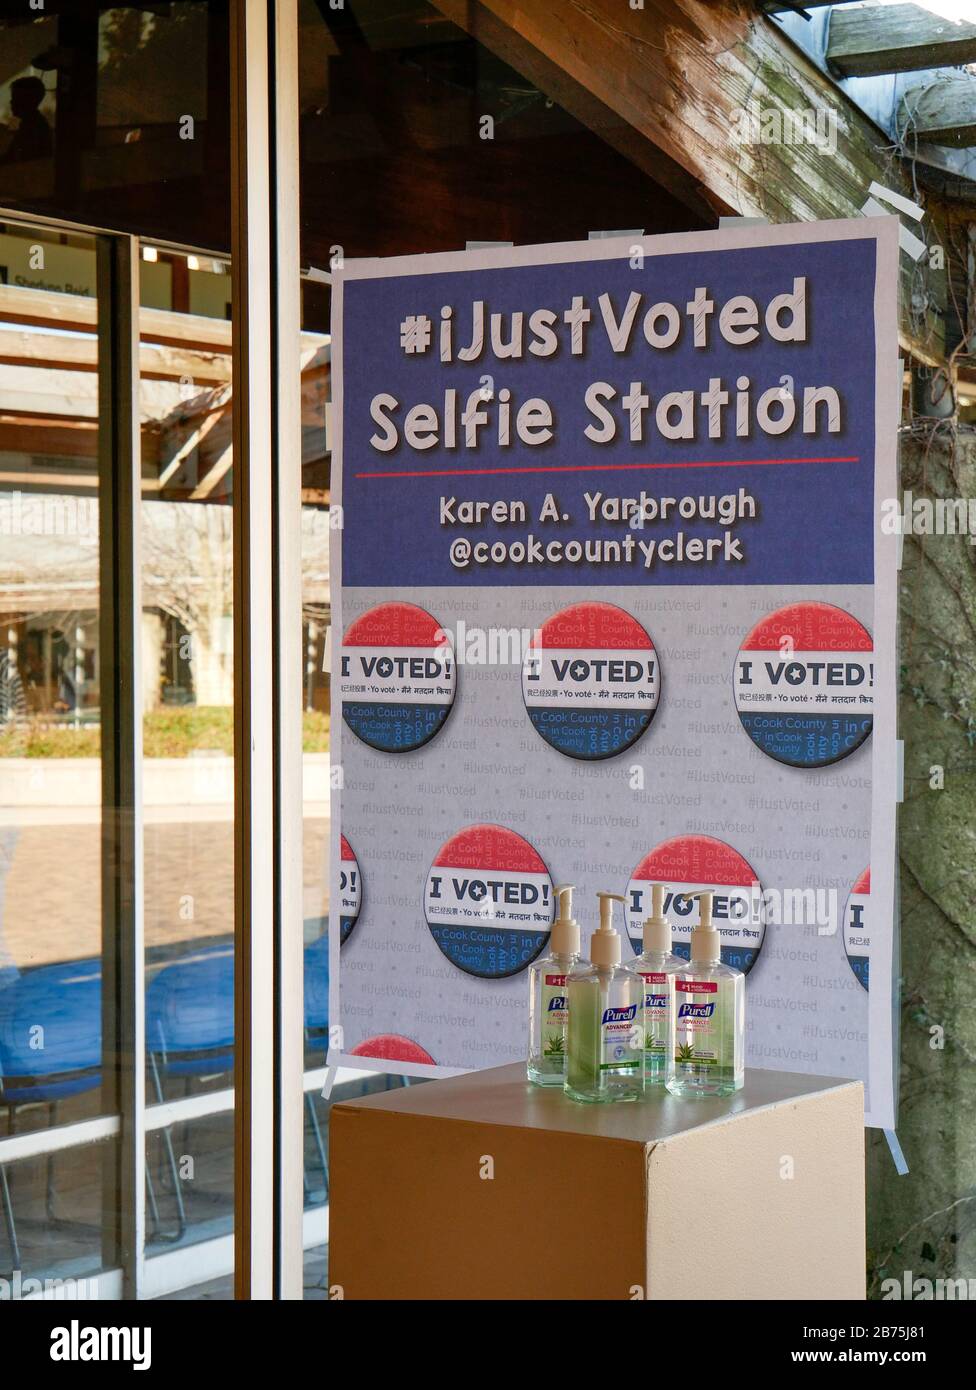 Oak Park, Illinois, USA. 13th March 2020. Bottles of hand sanitizers at an 'I voted' selfie station in Village Hall near the polling room as a precaution against Coronavirus/COVID-19. Early voting for the primary election continues until this Sunday afternoon. Stock Photo